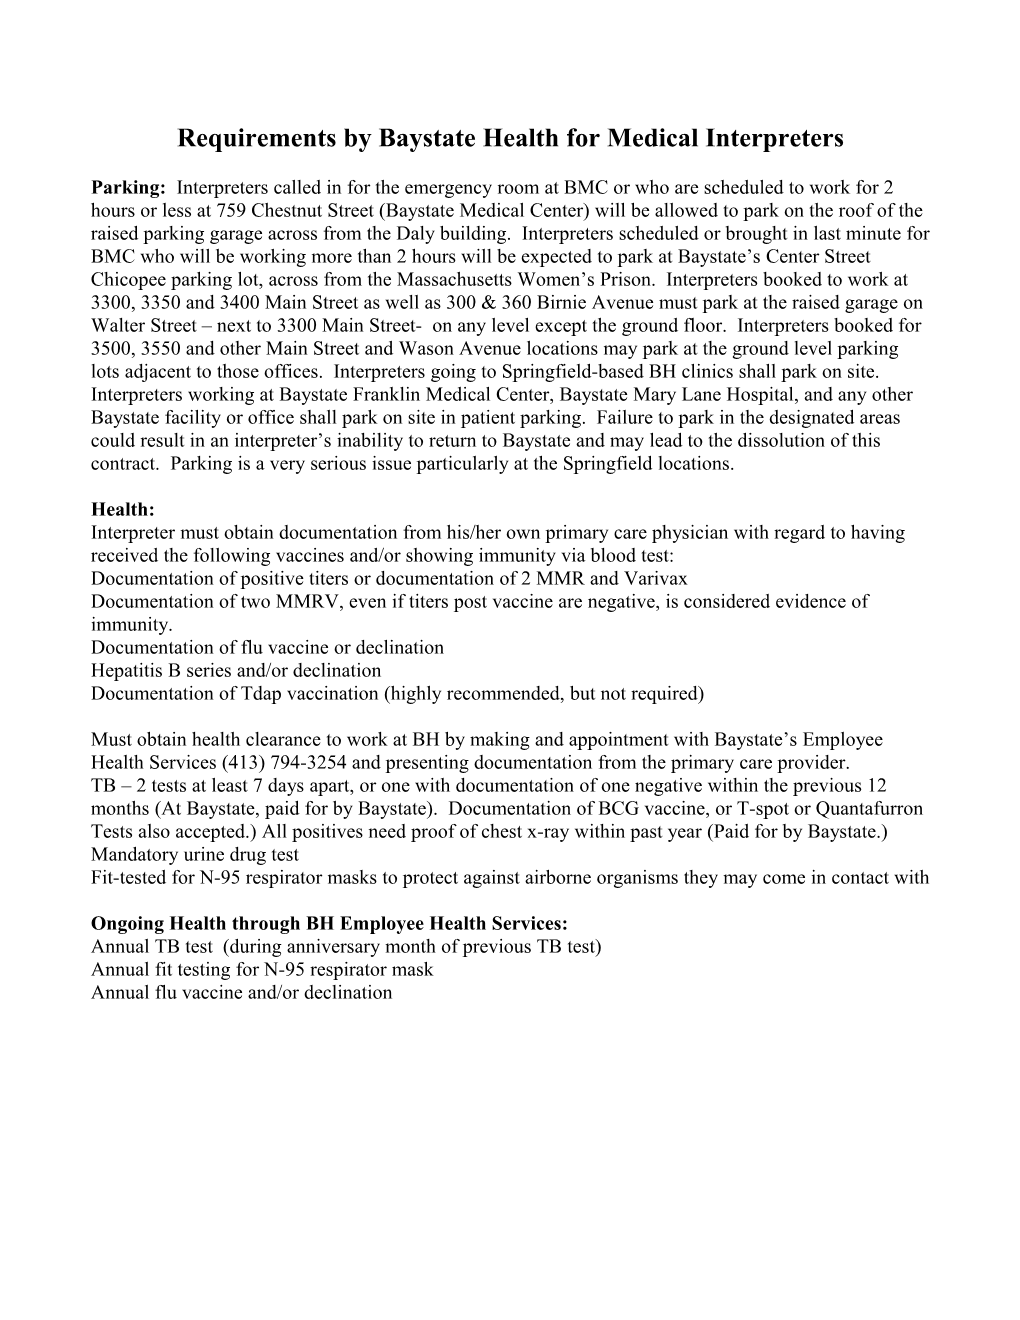 Requirements by Baystate Health for Contracts with Medical Interpreter Contract Agencies